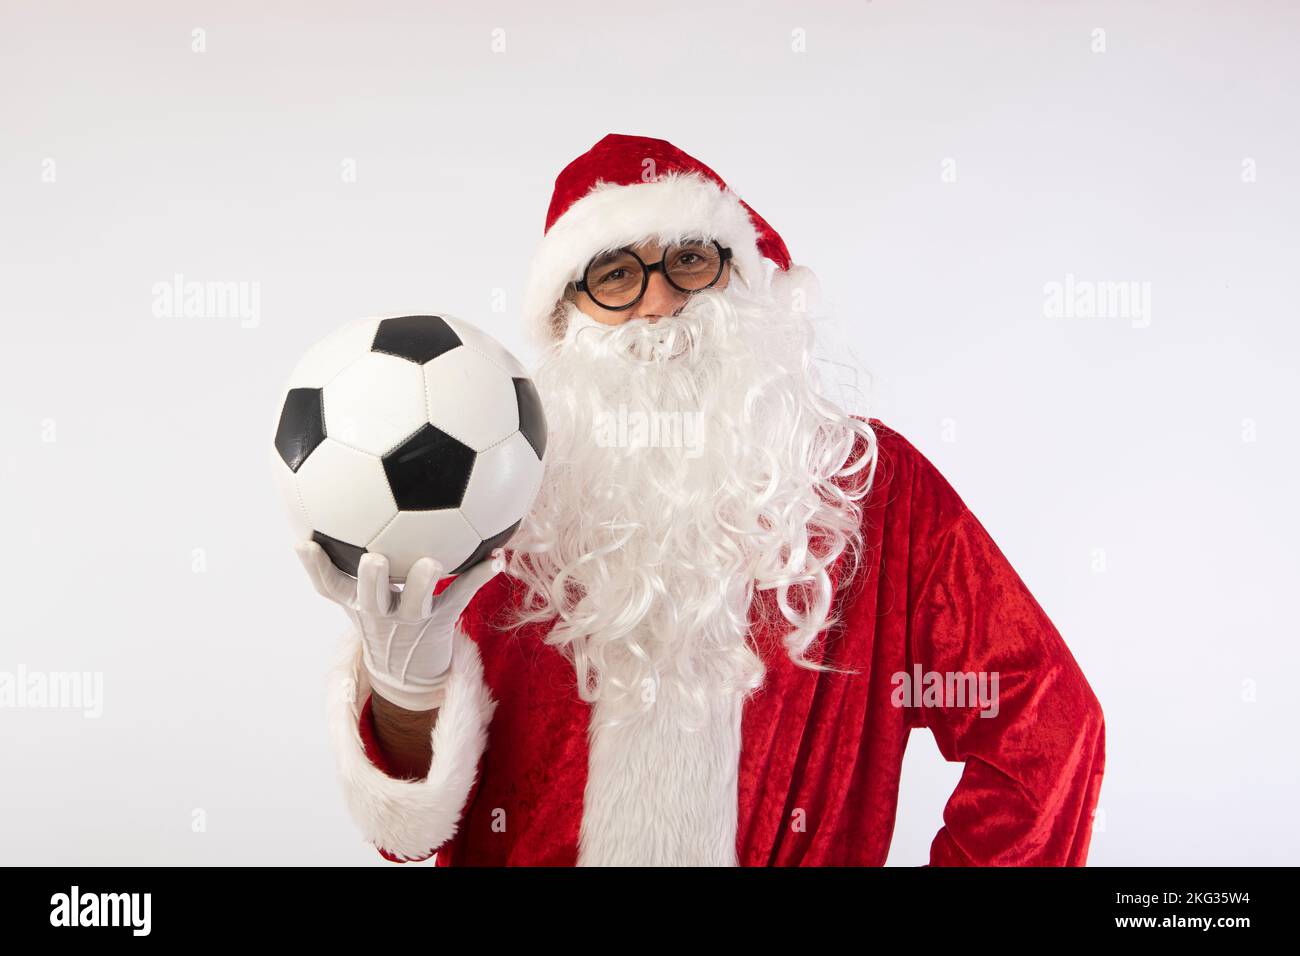 Santa Claus with glasses holding a World Cup soccer ball as a gift for all children, with a white background where his red suit and white beard stand Stock Photo